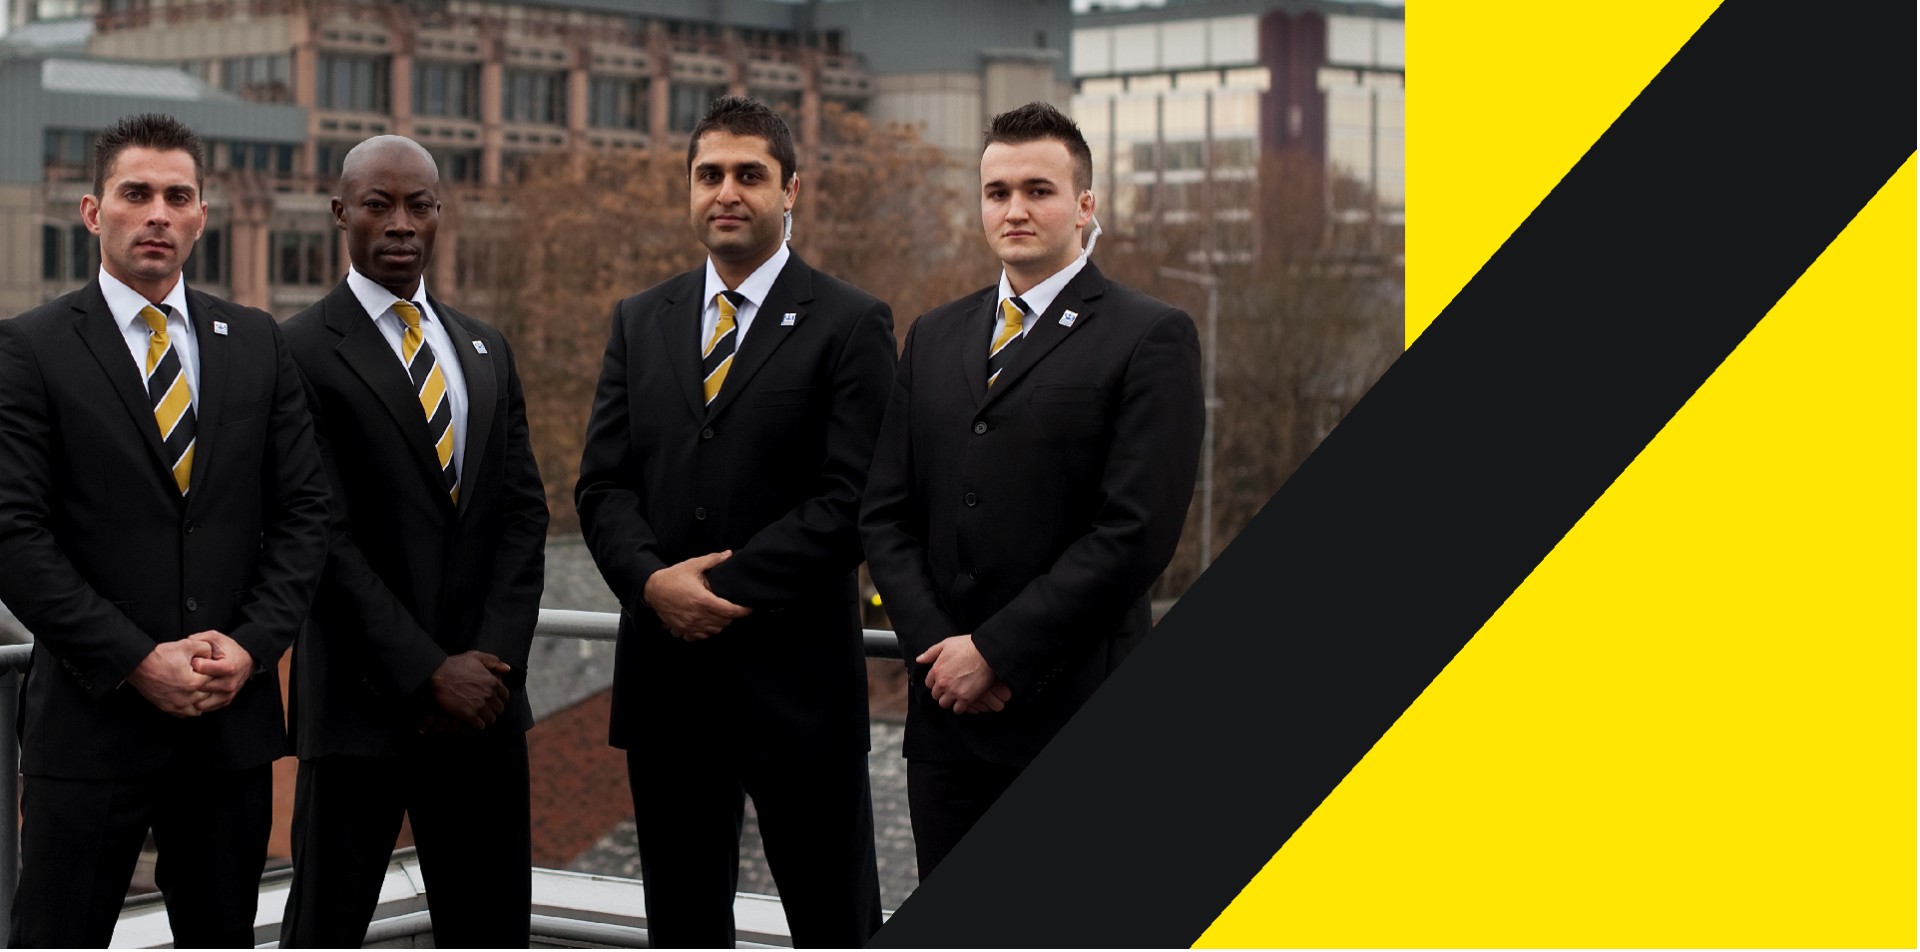 Security Services Company in London - Paladin